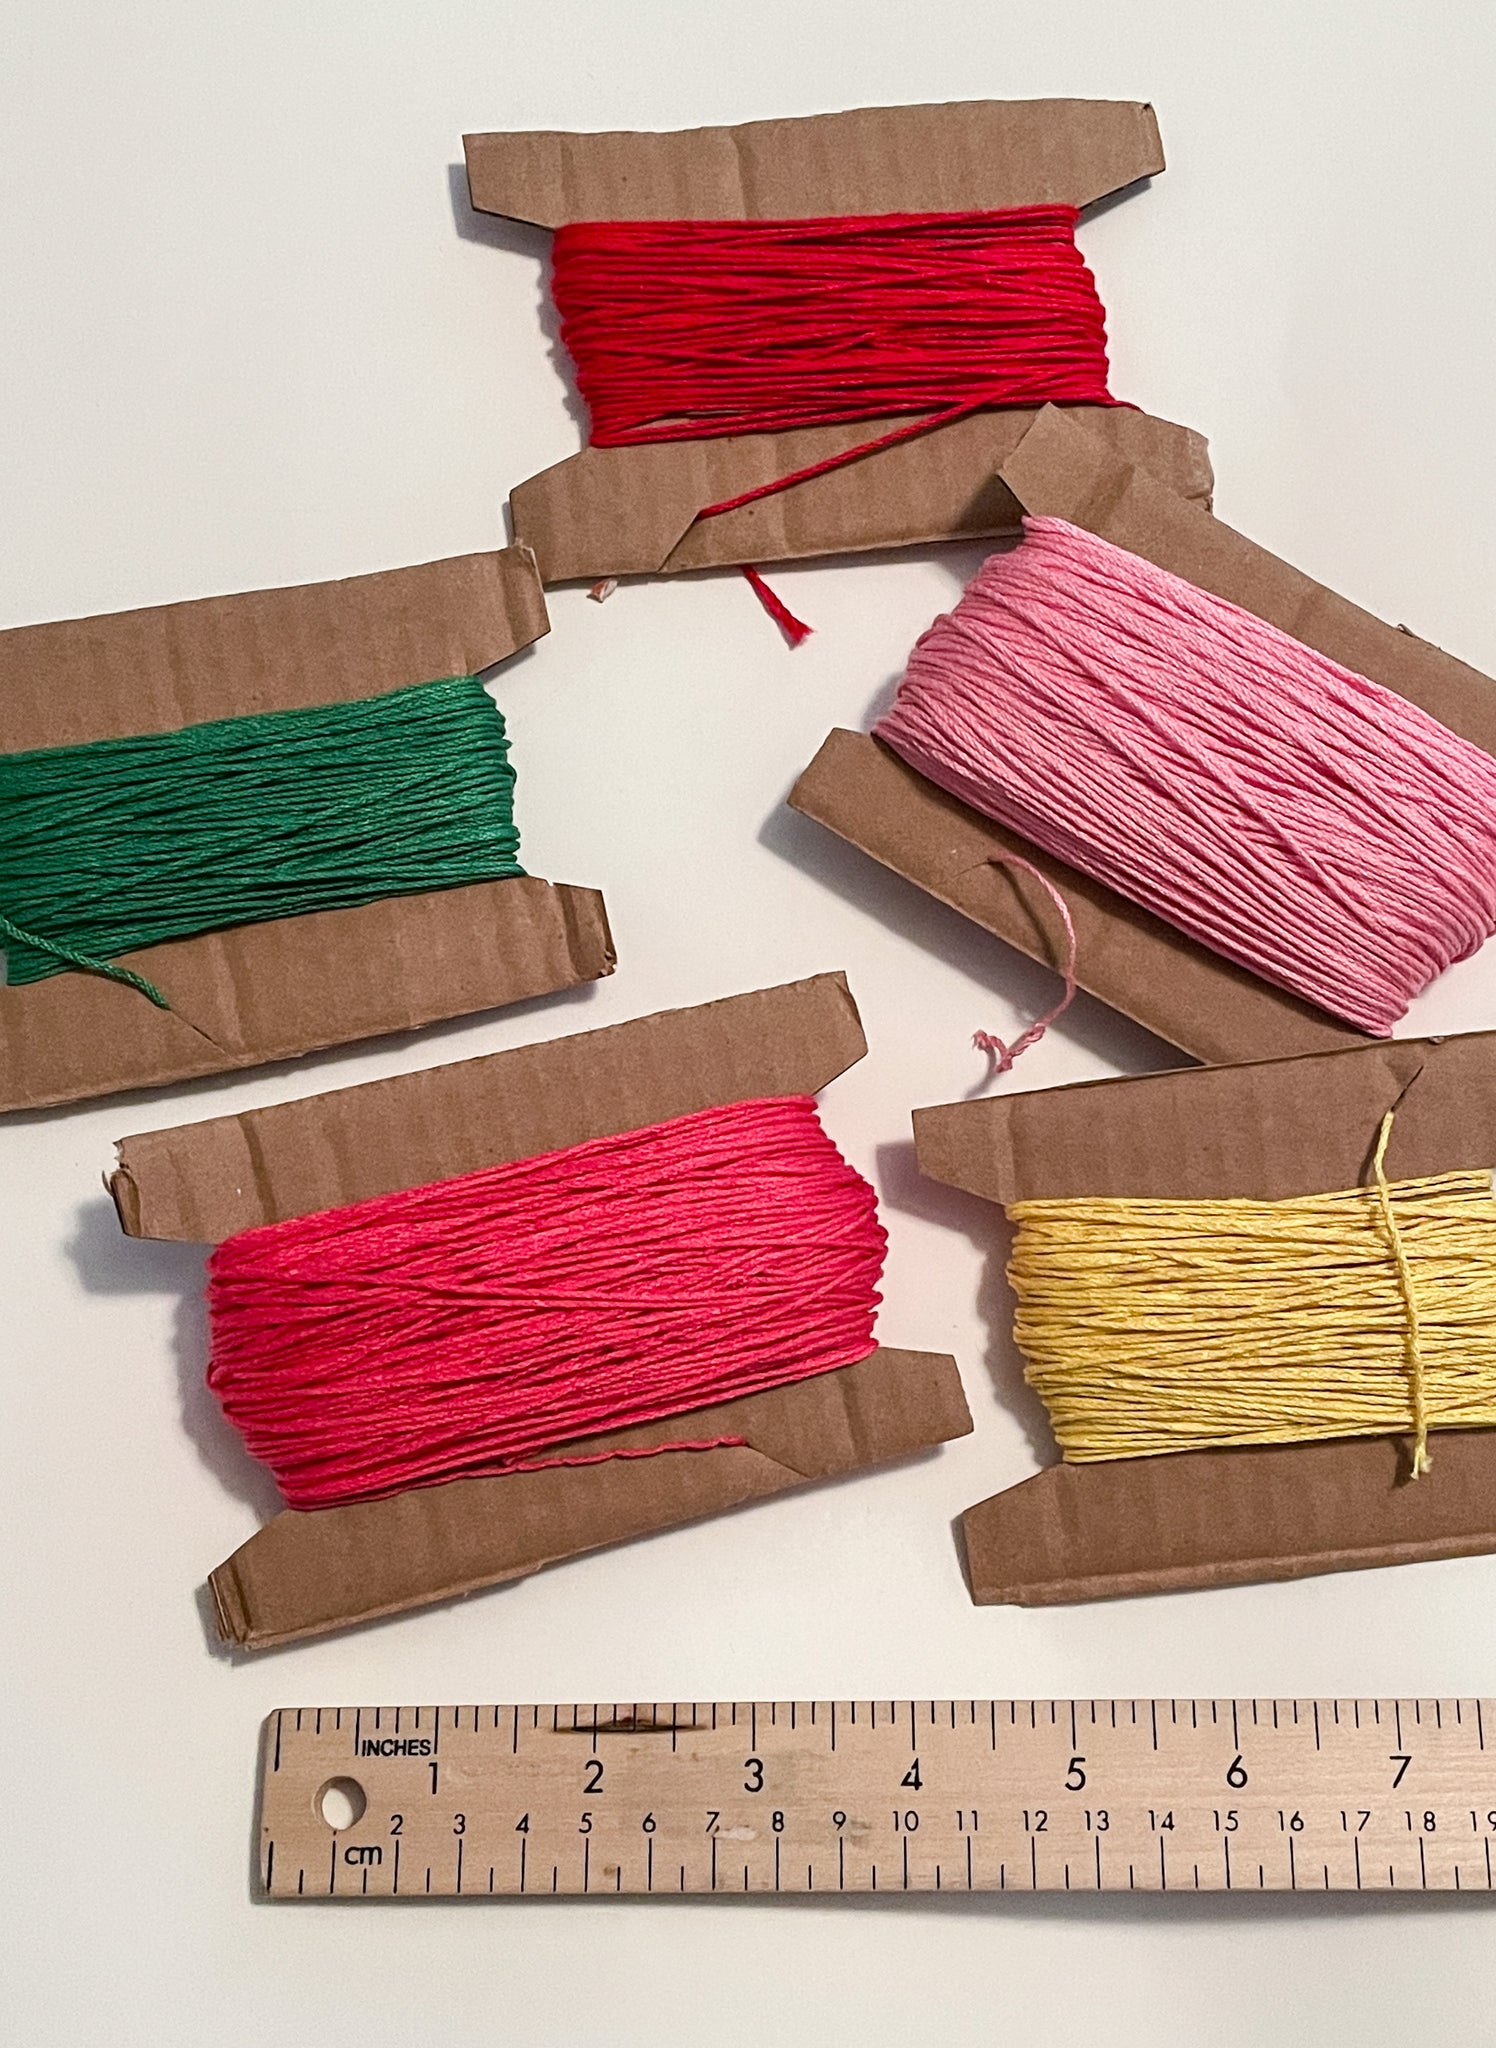 Cotton Crochet Thread Remnant Bundle - Red, Pinks, Yellow and Green